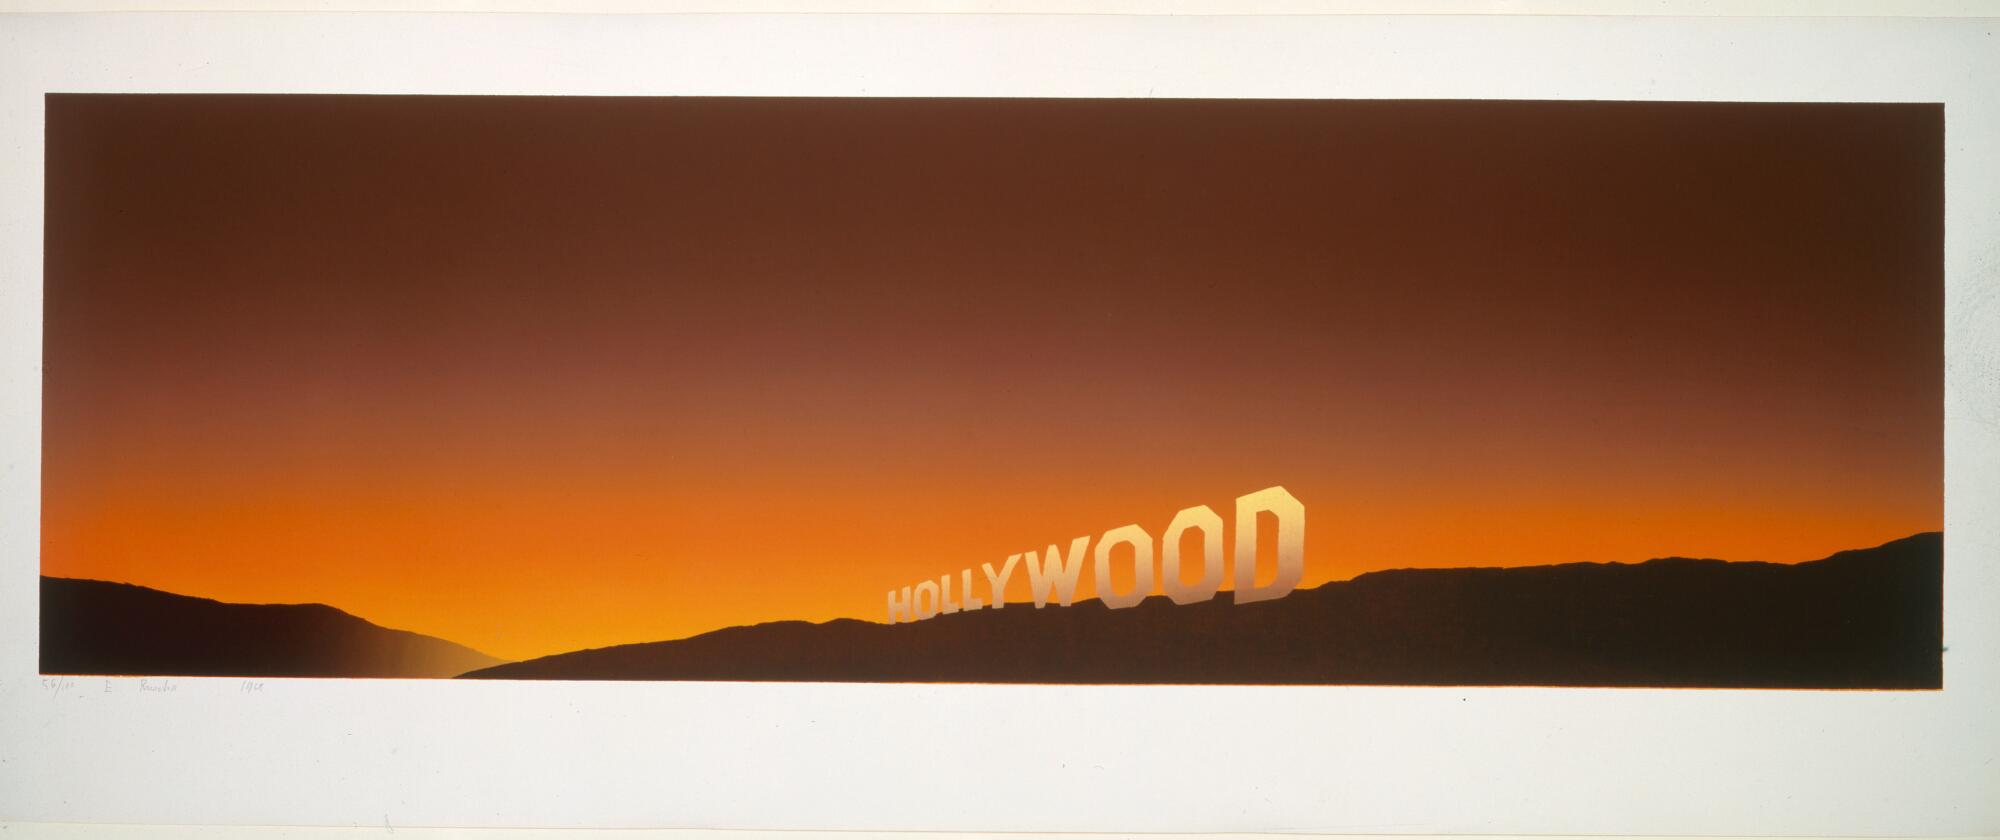 Ed Ruscha Hollywood Poster, Hollywood, 1968, Los Angeles County Museum of Art, Museum Acquisition Fund, © Ed Ruscha, photo